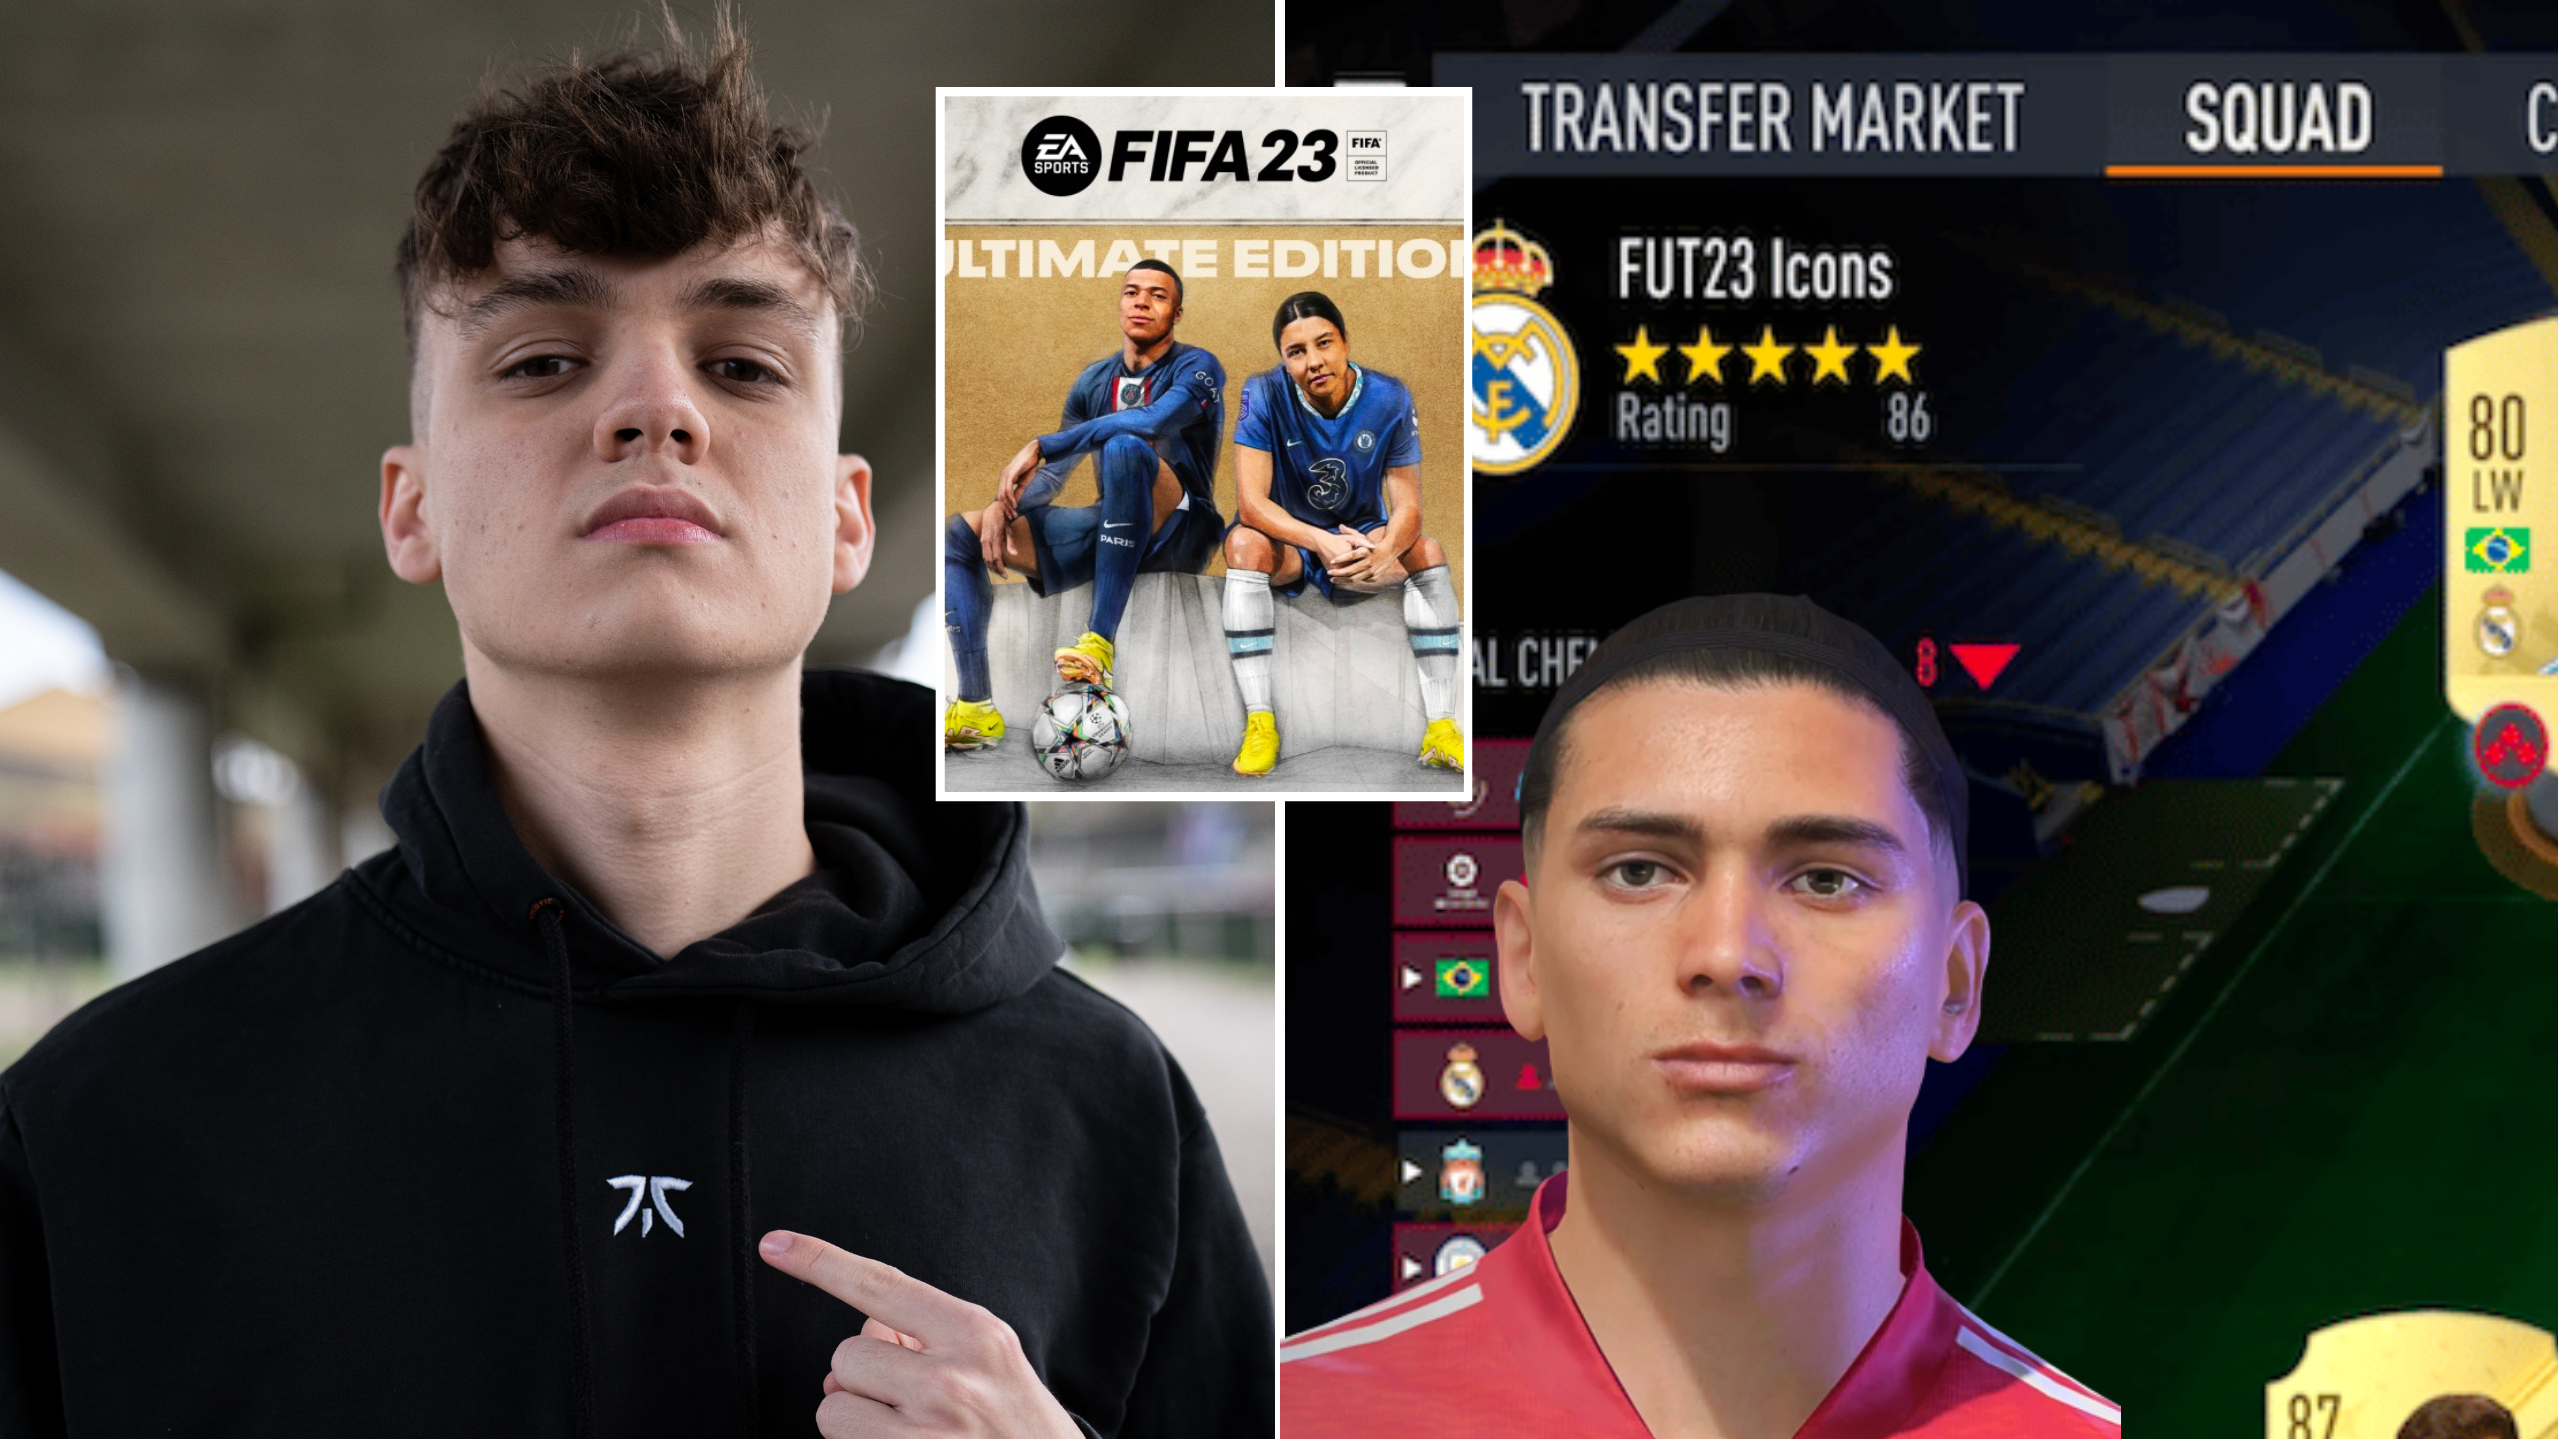 The best players in FIFA 23